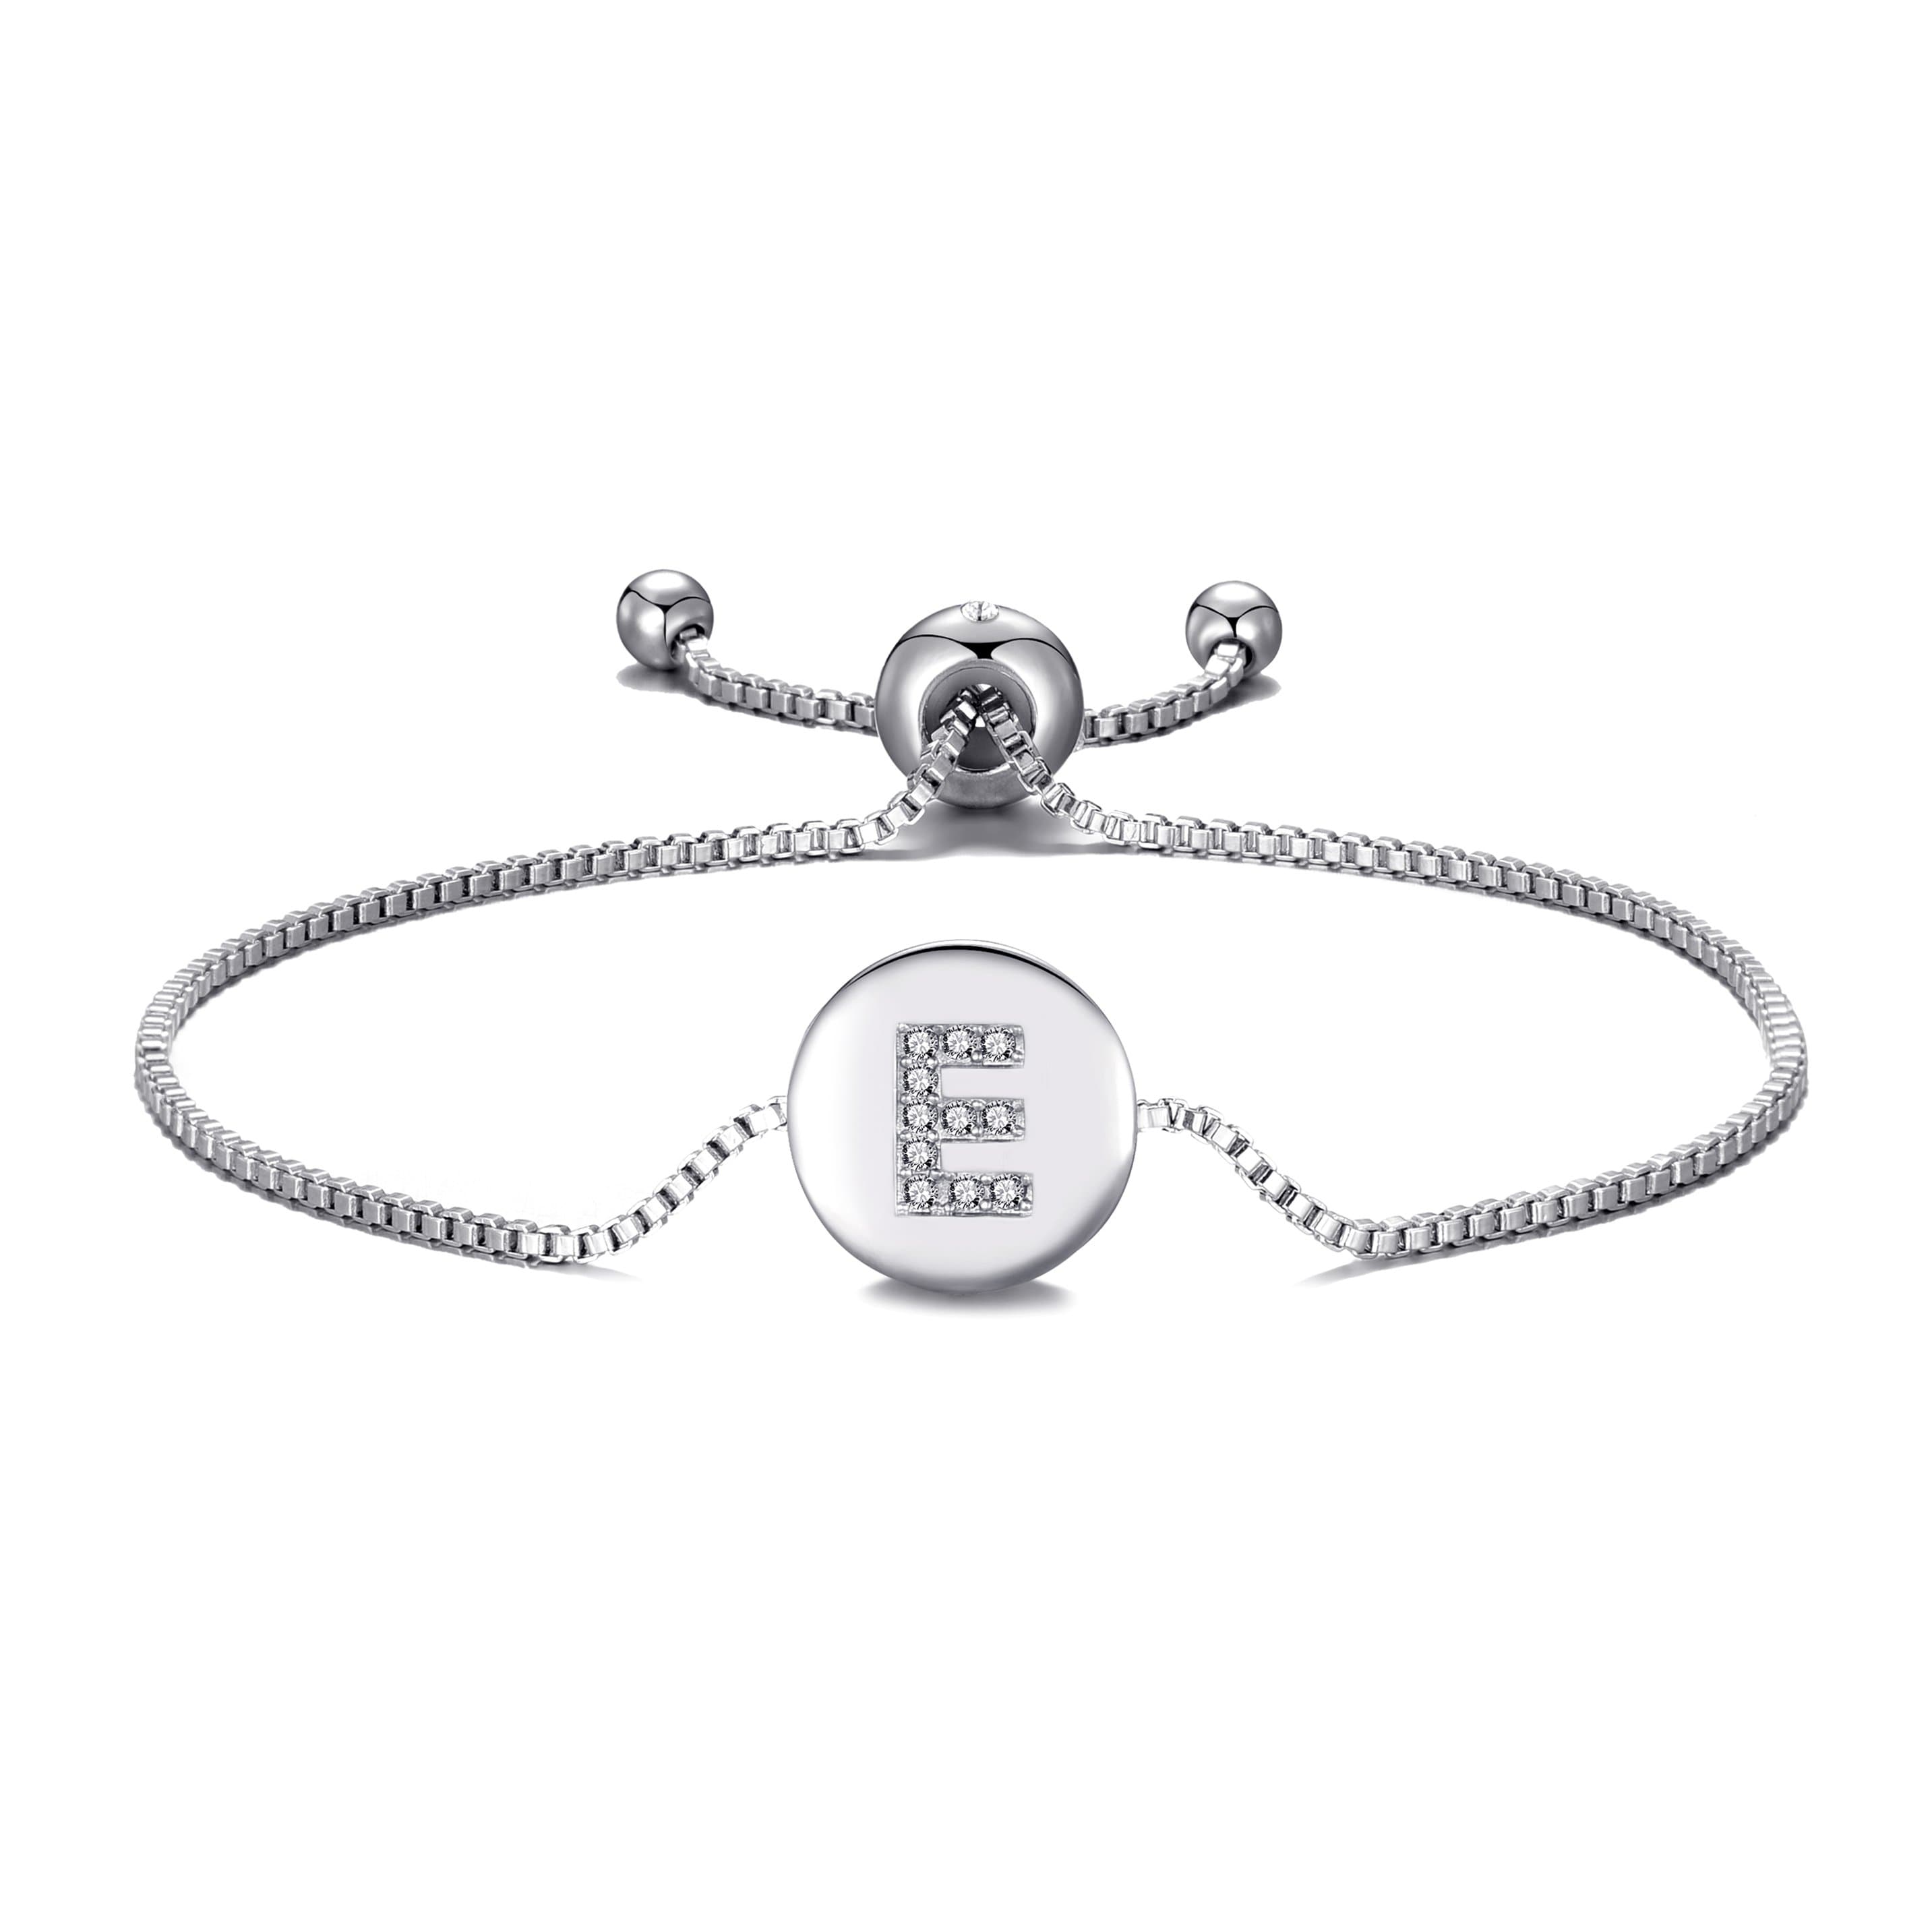 Initial Friendship Bracelet Letter E Created with Zircondia® Crystals by Philip Jones Jewellery